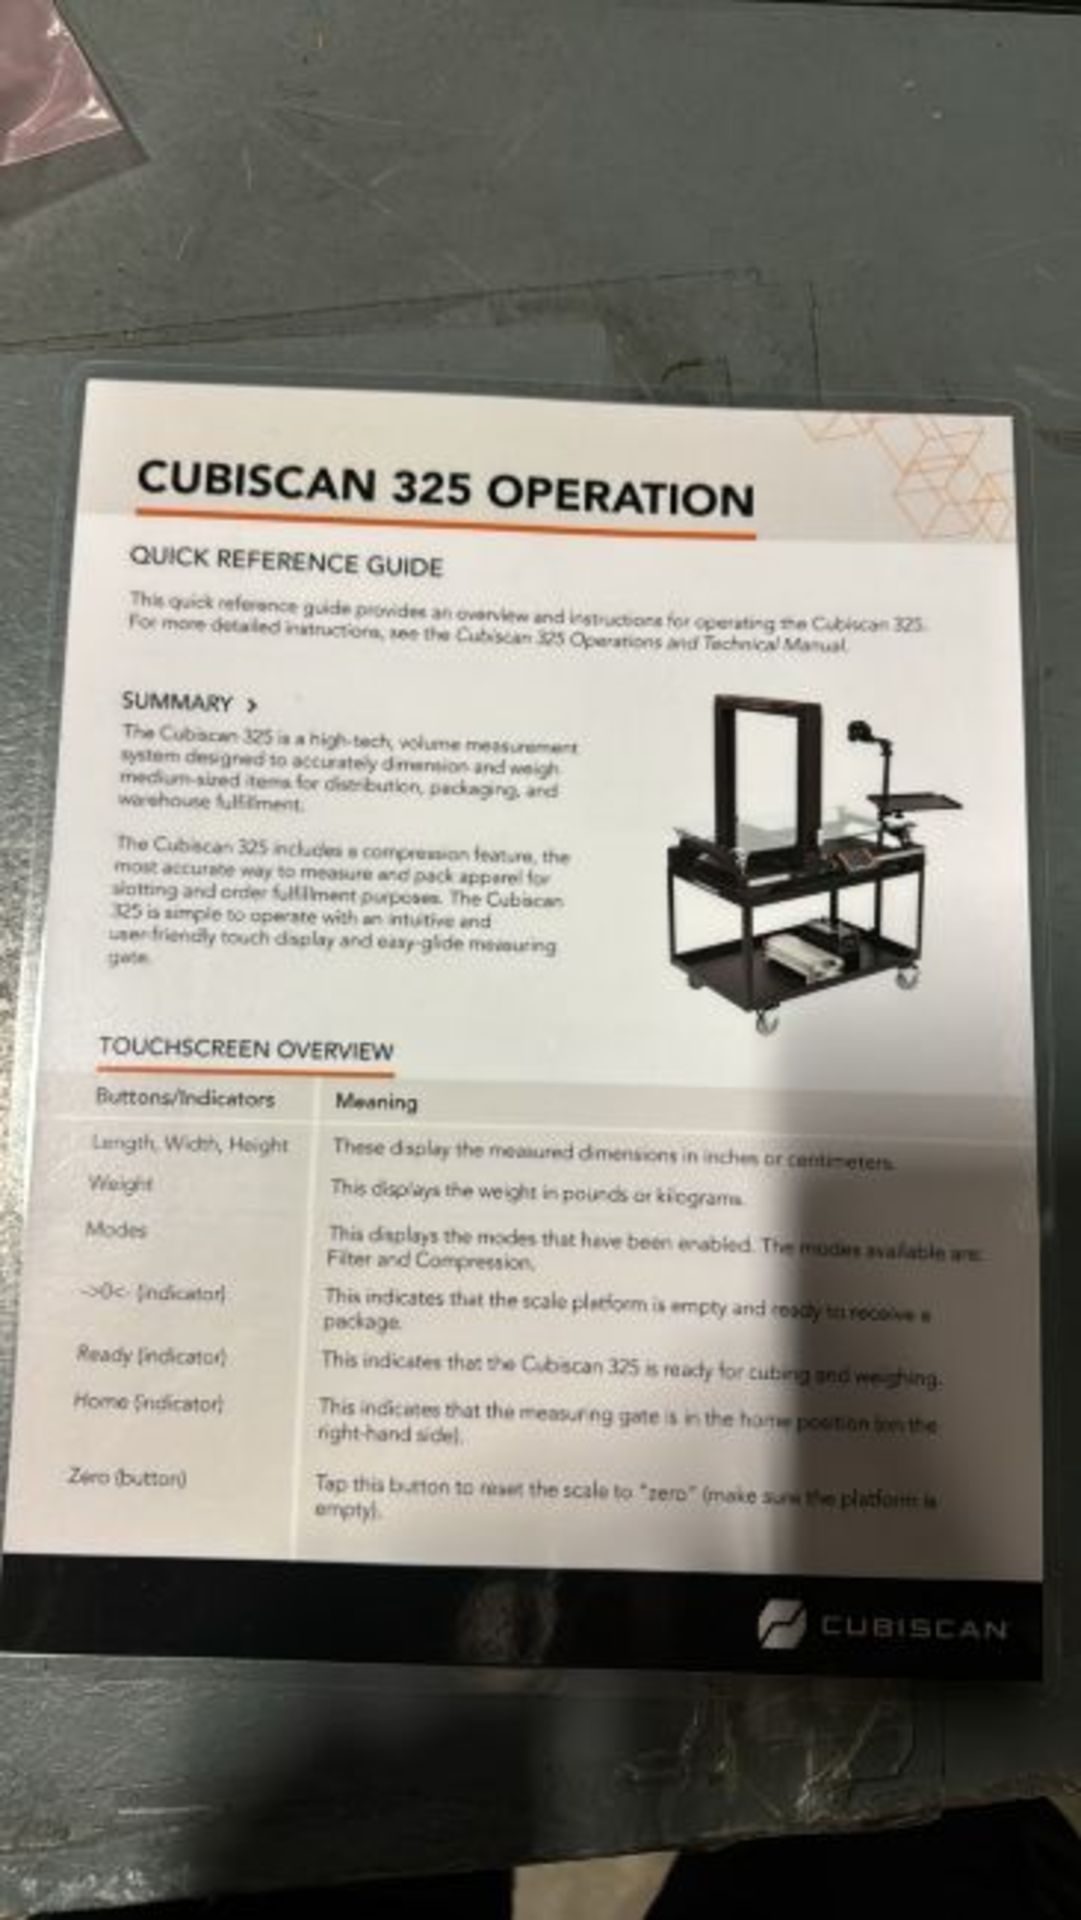 Cubiscan 325 - Excels at dimensioning apparel and non-rigid items - Image 9 of 13